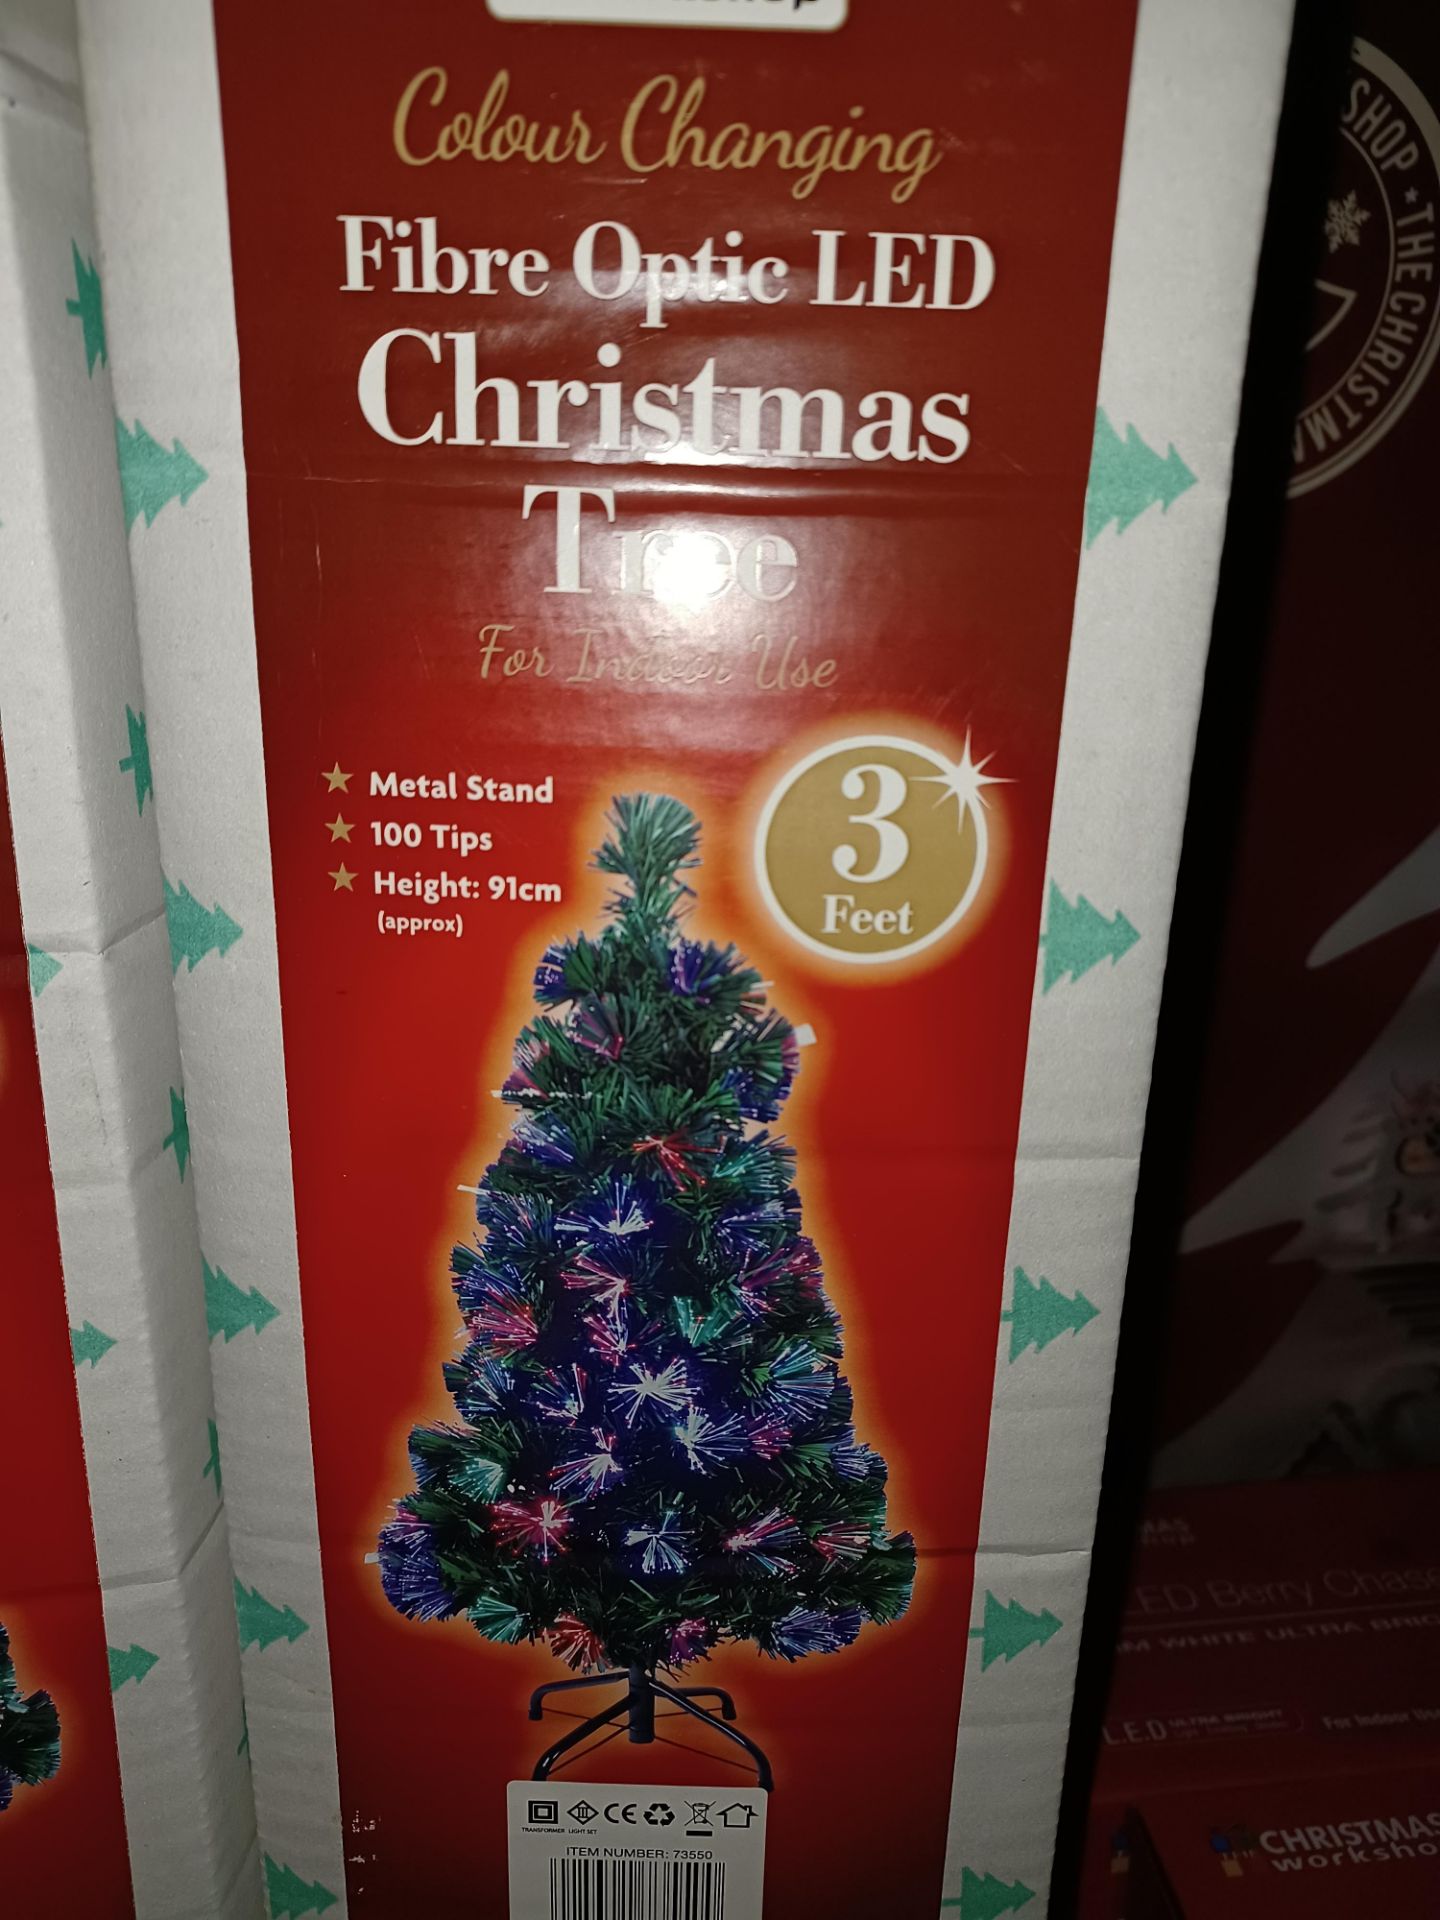 2 X NEW BOXED COLOUR CHANGING FIBRE OPTIC LED CHRISTMAS TREE, 3FT, 100 TIPS, METAL STAND - PCK